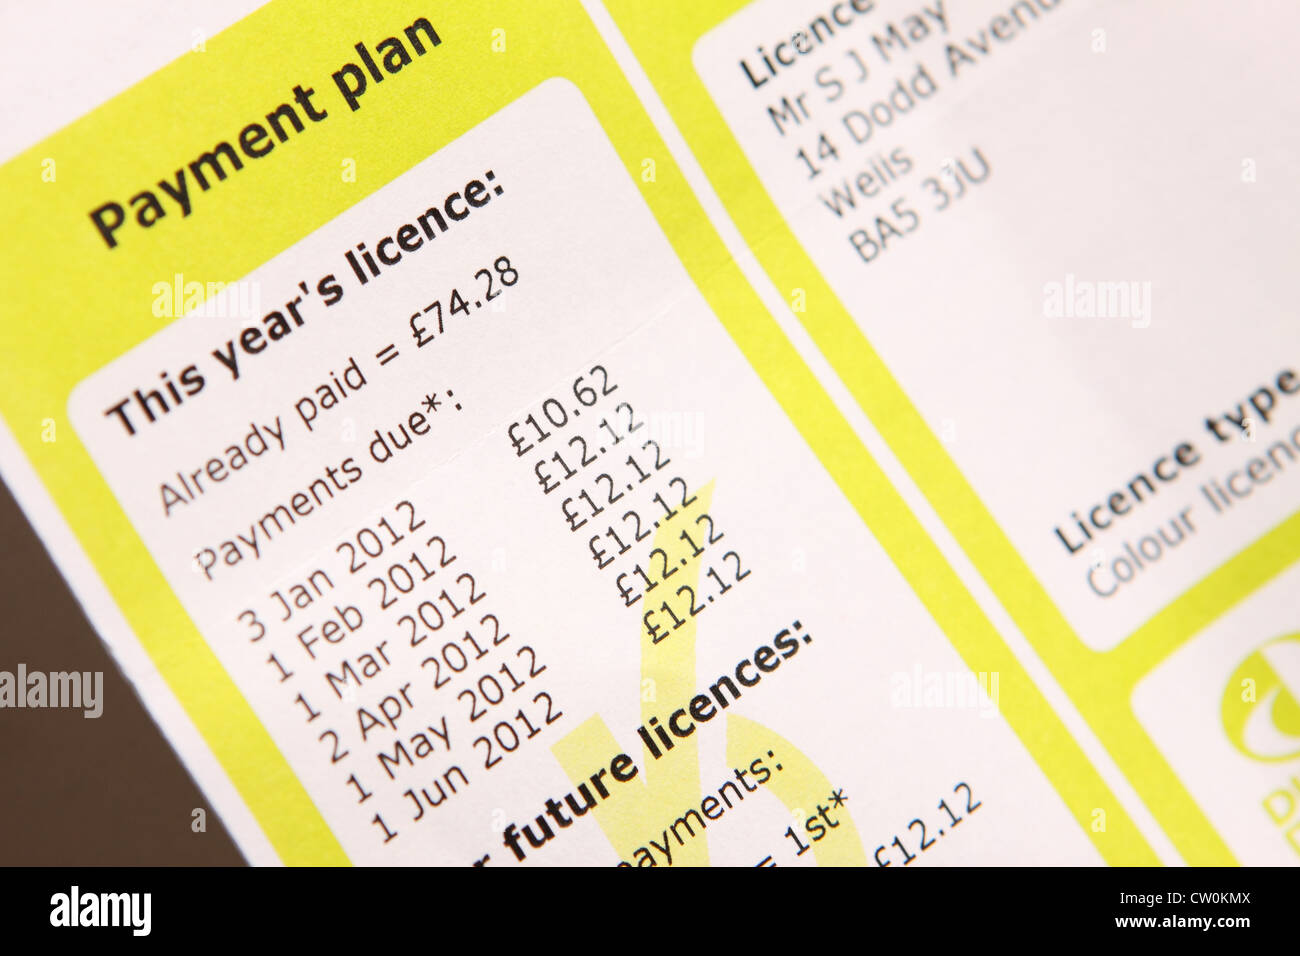 TV Licence direct debit monthly payments bill Stock Photo